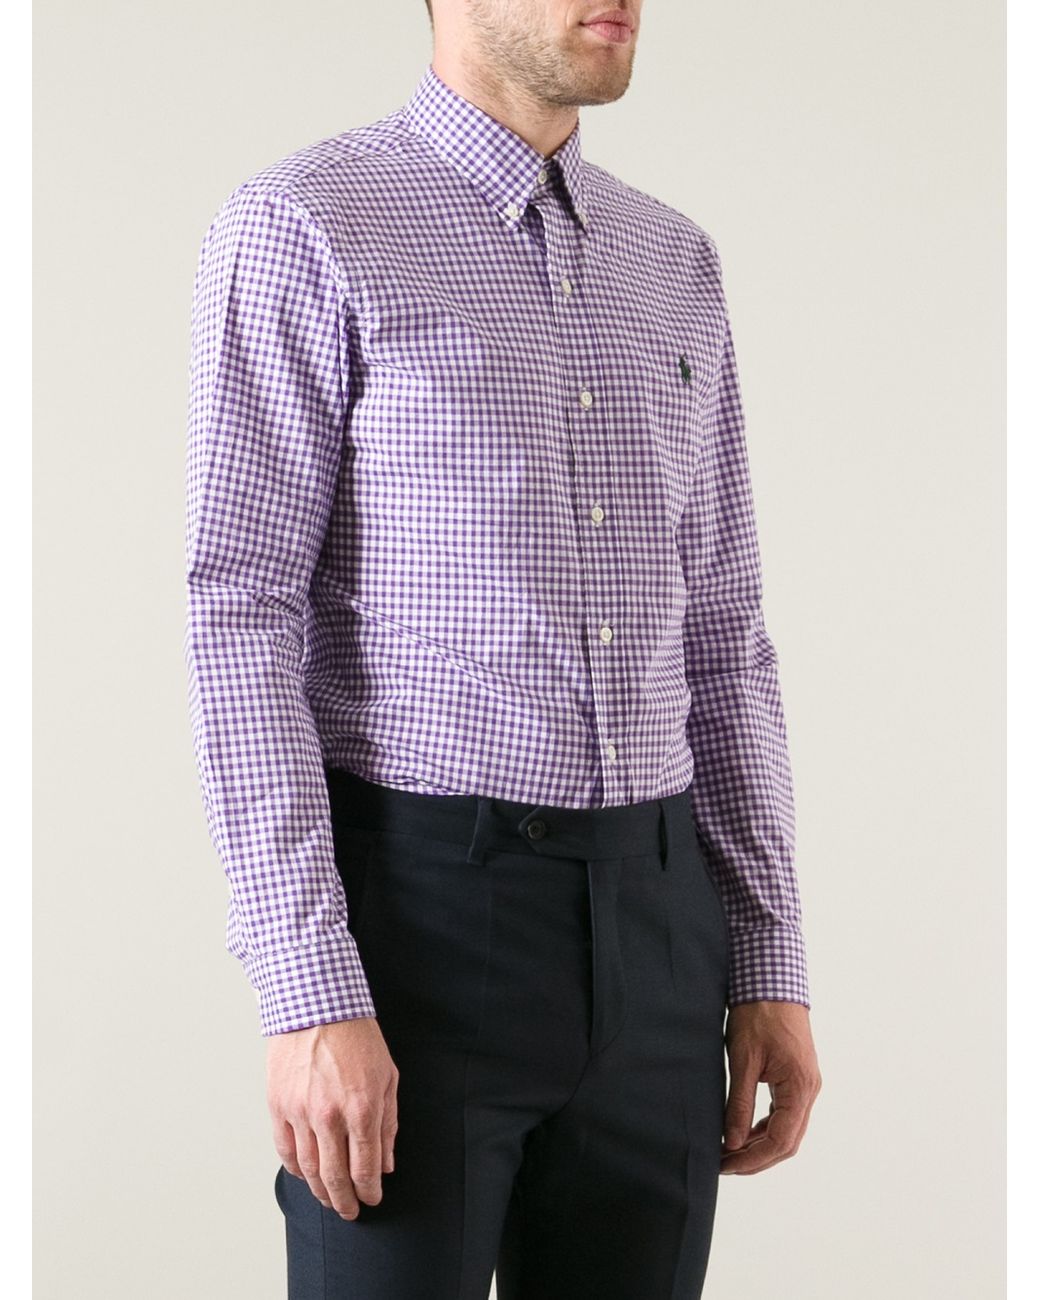 Polo Ralph Lauren Checked Shirt in Pink & Purple (Purple) for Men | Lyst